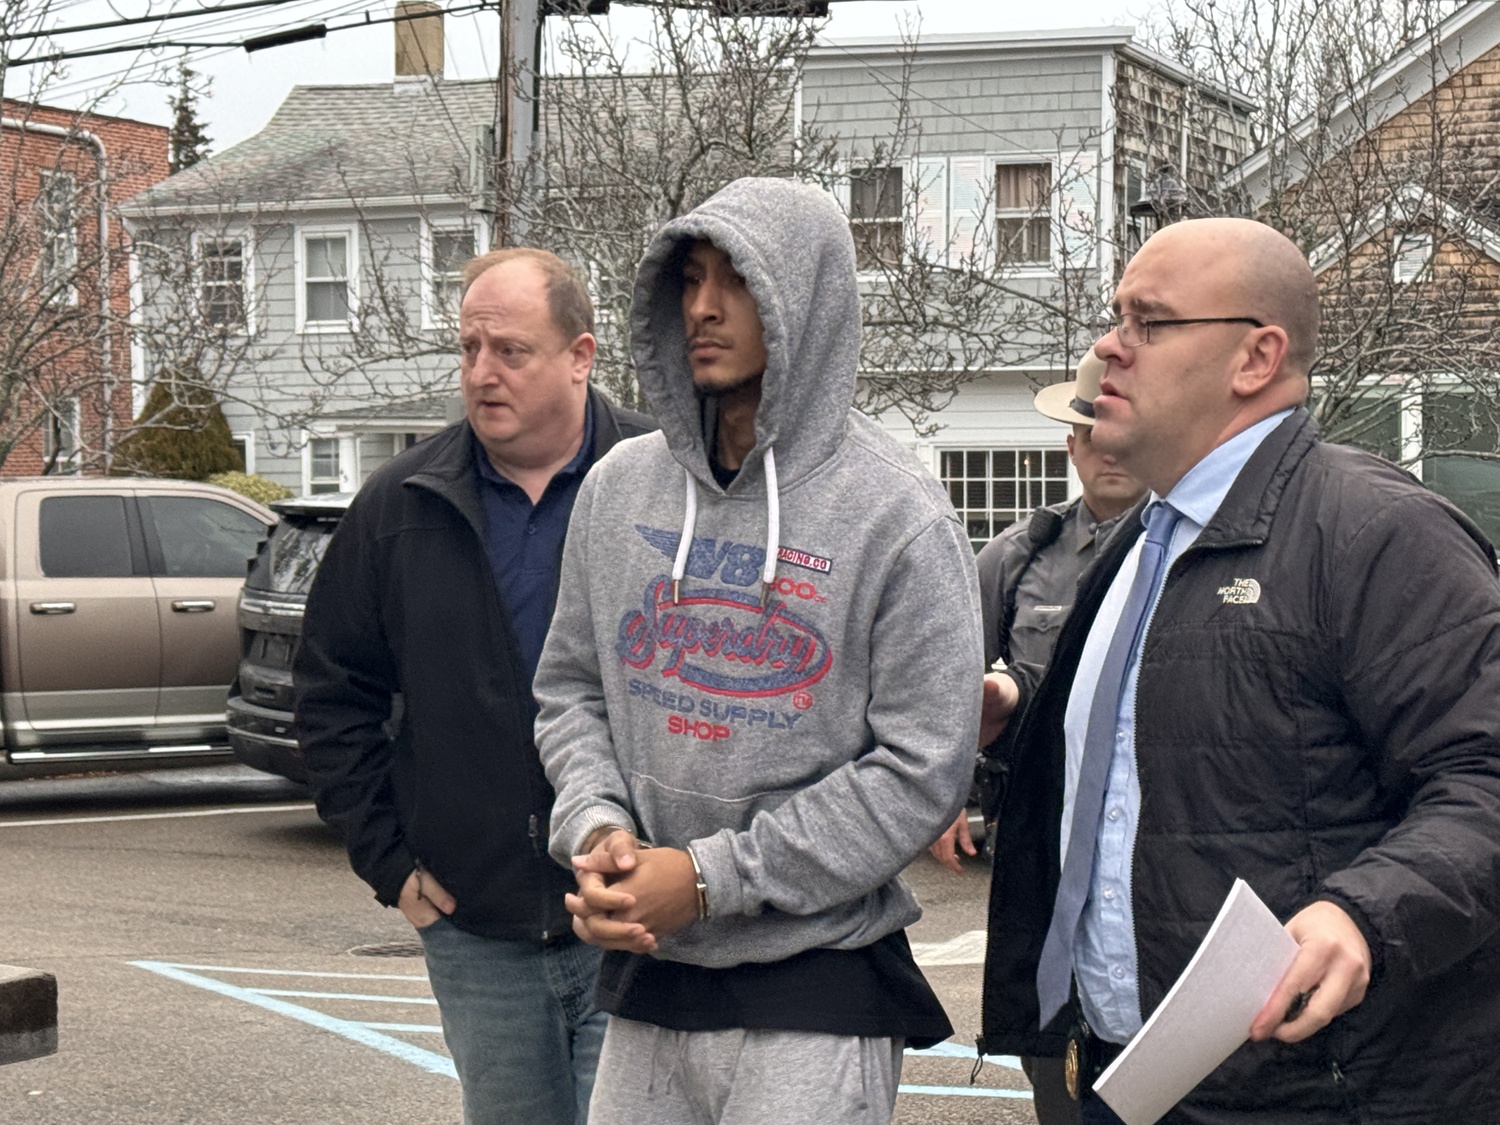 Peter C. Aviles was apprehended this week in New York City in relation to a 2022 burglary in Sag Harbor that netted more than $1 million in cash, jewelry and fine wines. He was brought into Sag Harbor Village Justice Court for arraignment on Wednesday by New York State Police.